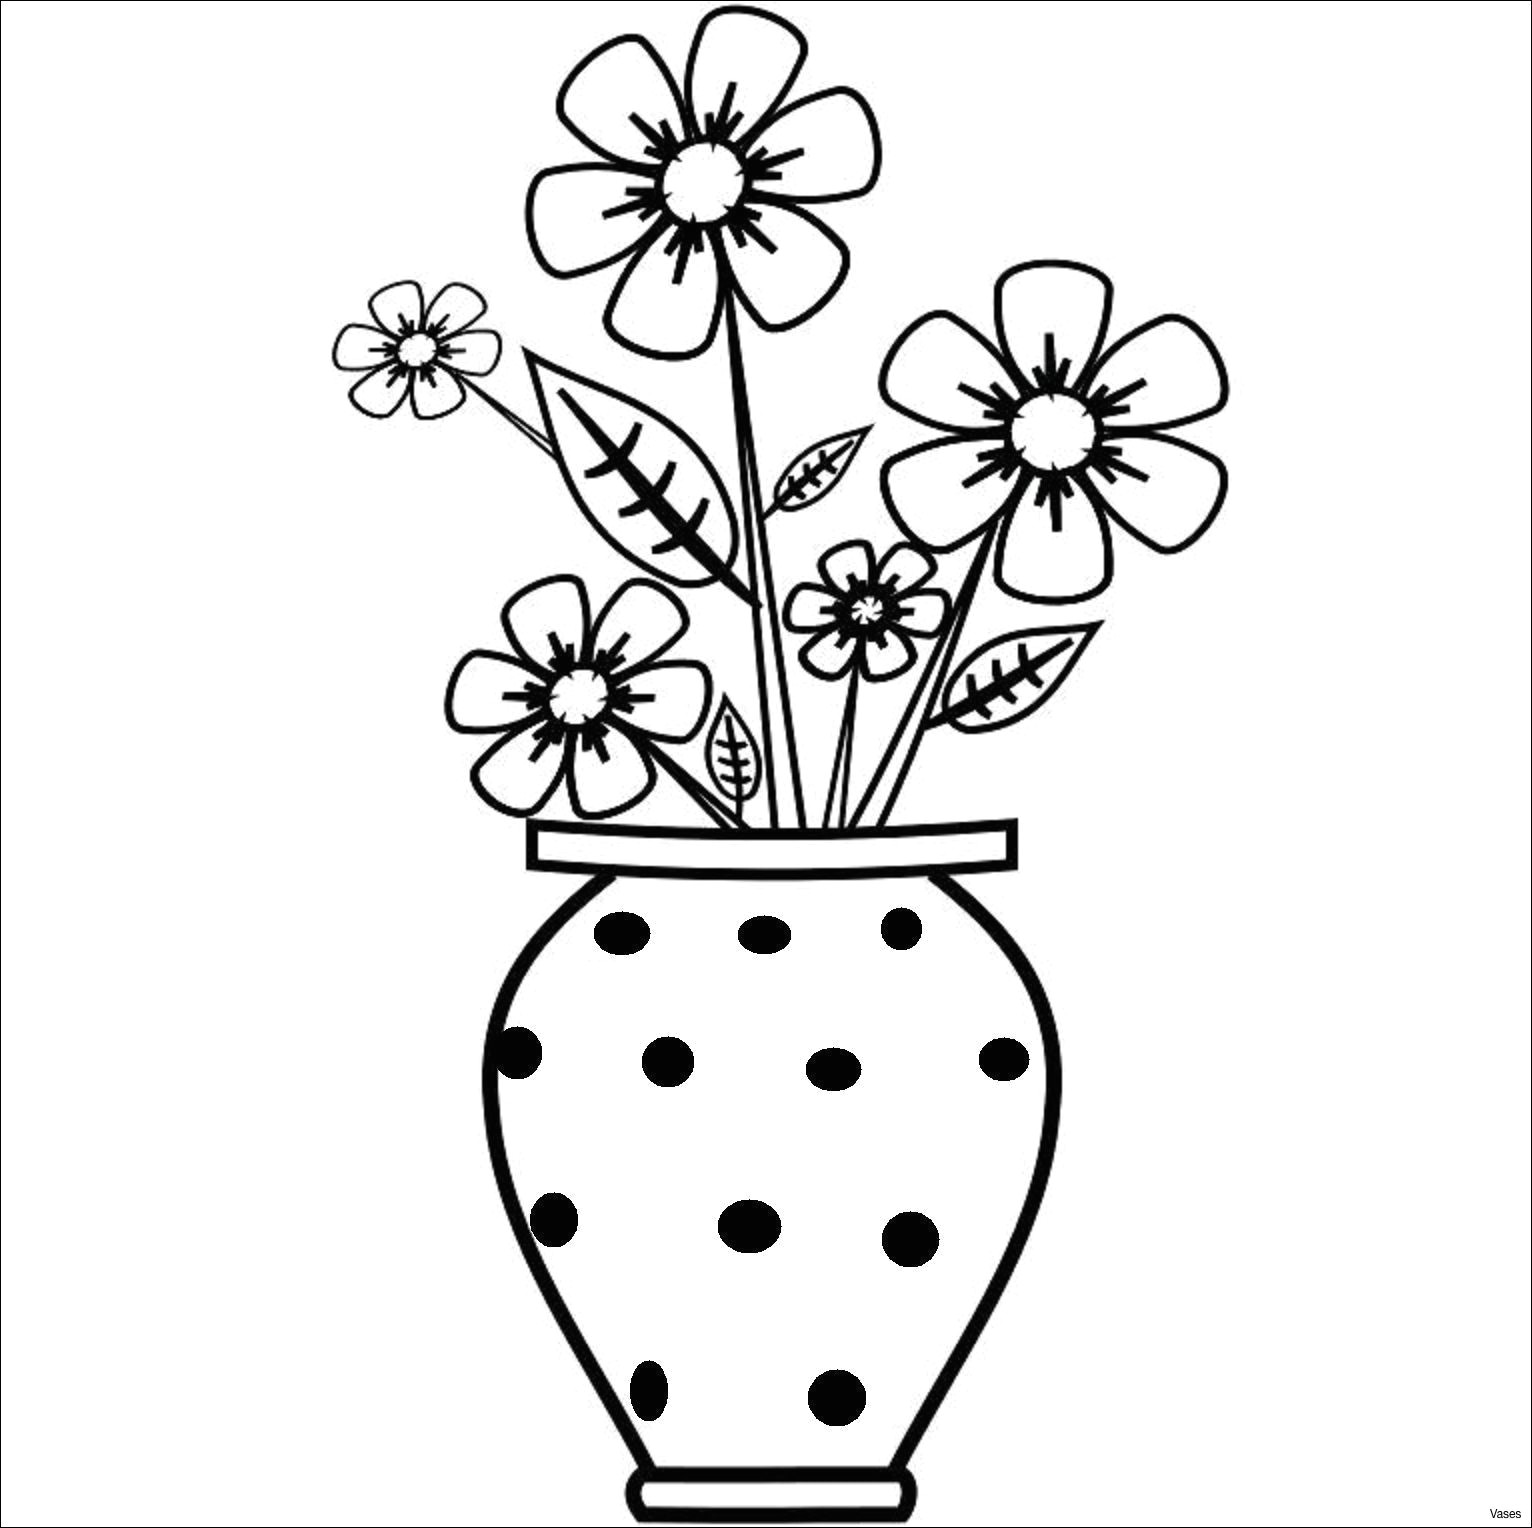 Drawings Of Flowers that are Easy Pics Of Drawings Easy Vase Art Drawings How to Draw A Vase Step 2h